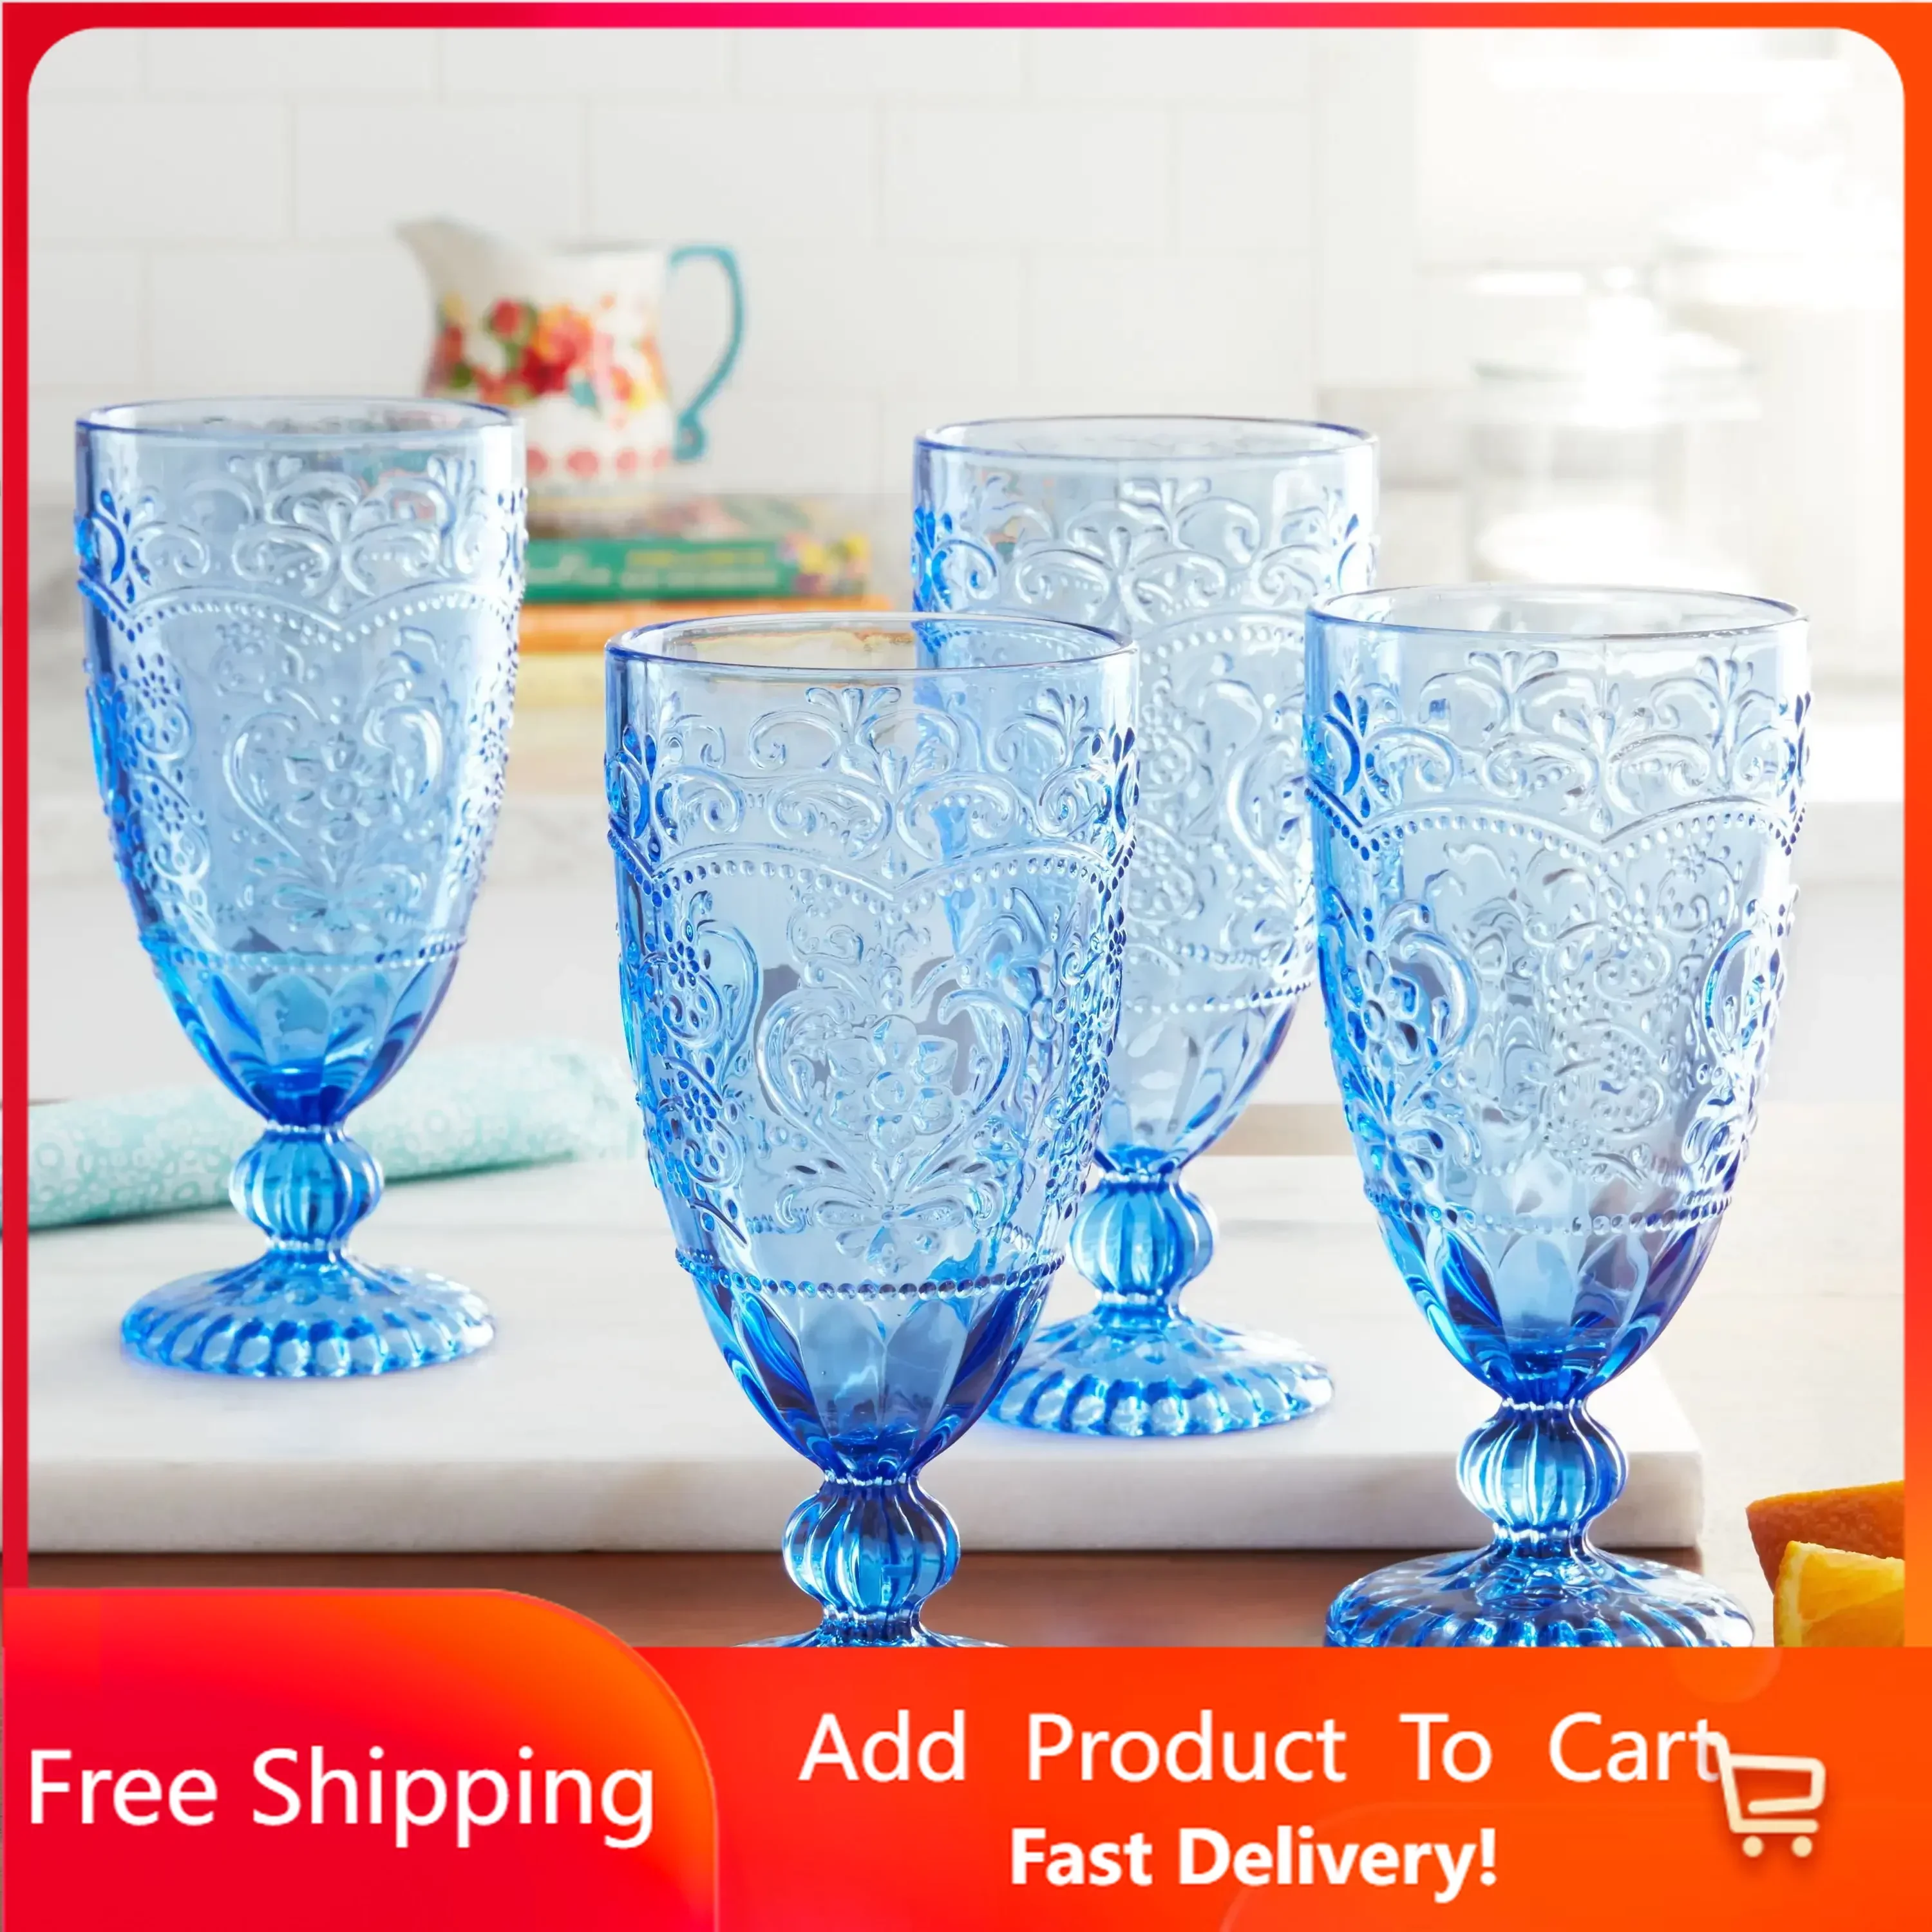 

Amelia 4-Piece 14.7-Ounce Goblet Set, Blue wine glasses cocktail glass Rapid Transit Free Shipping